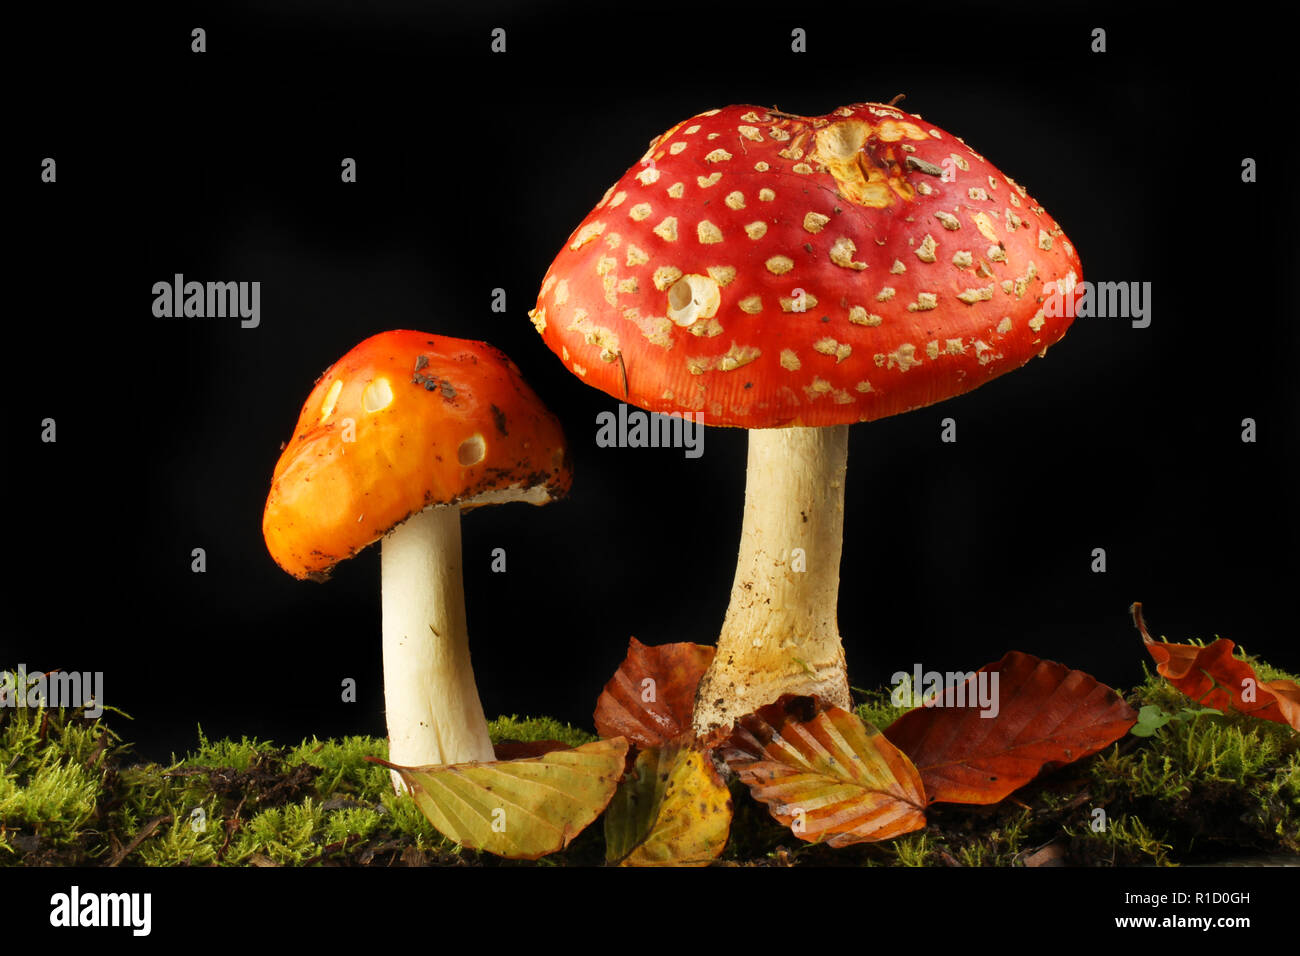 Fly agaric mushrooms growing in moss and leaf litter against a black background Stock Photo